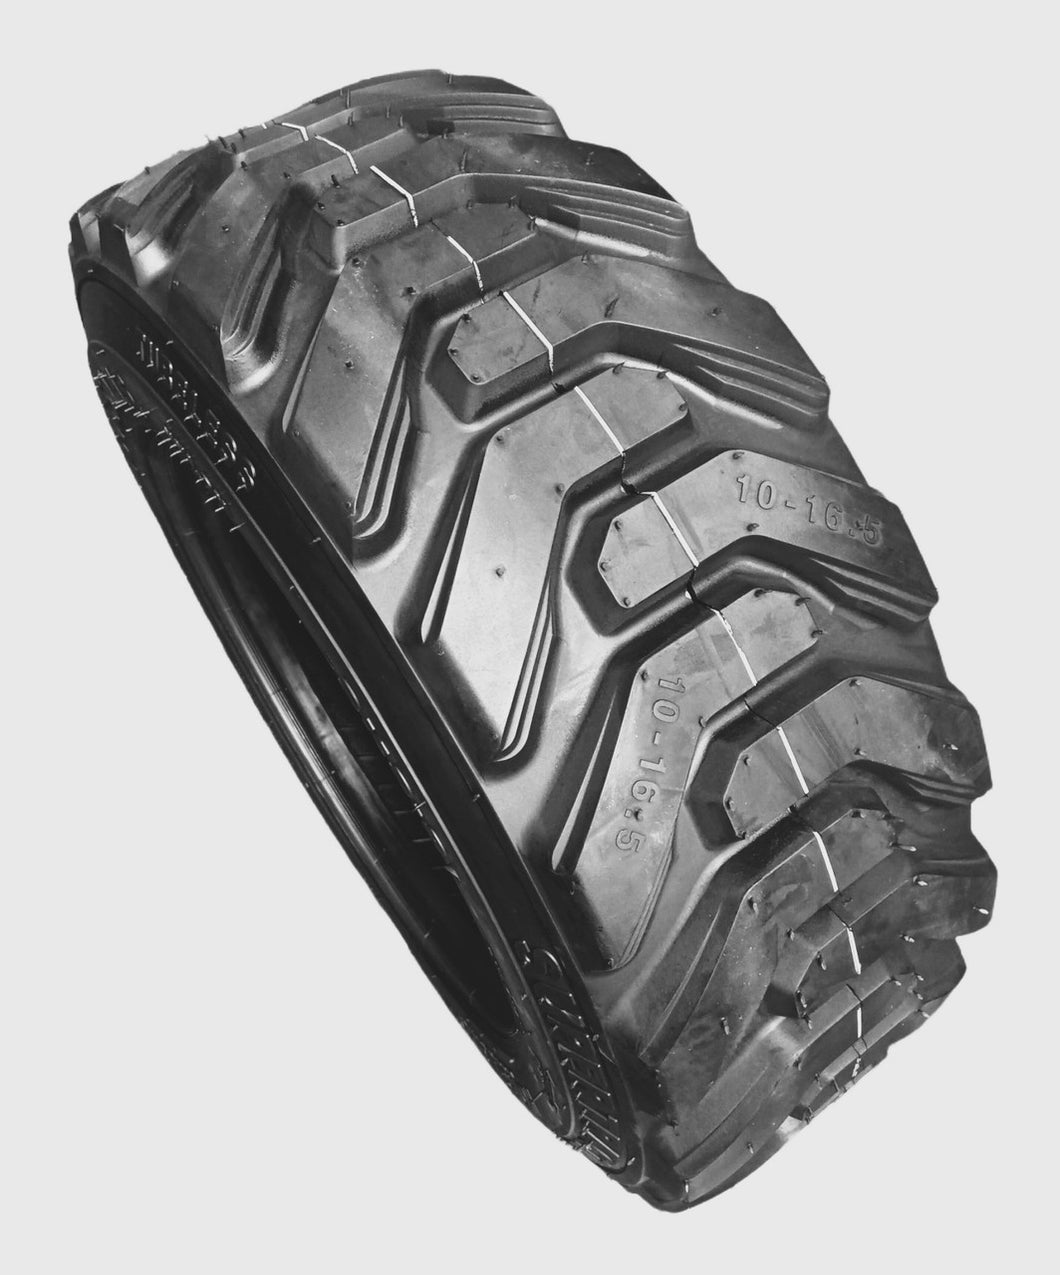 10-16.5 Skid Steer Tubeless Tire w/Rim-Guard 16Ply Rating Super Heavy Duty H Load 265/70-16.5 10x16.5 NHS R-4 SKS8 10 16.5